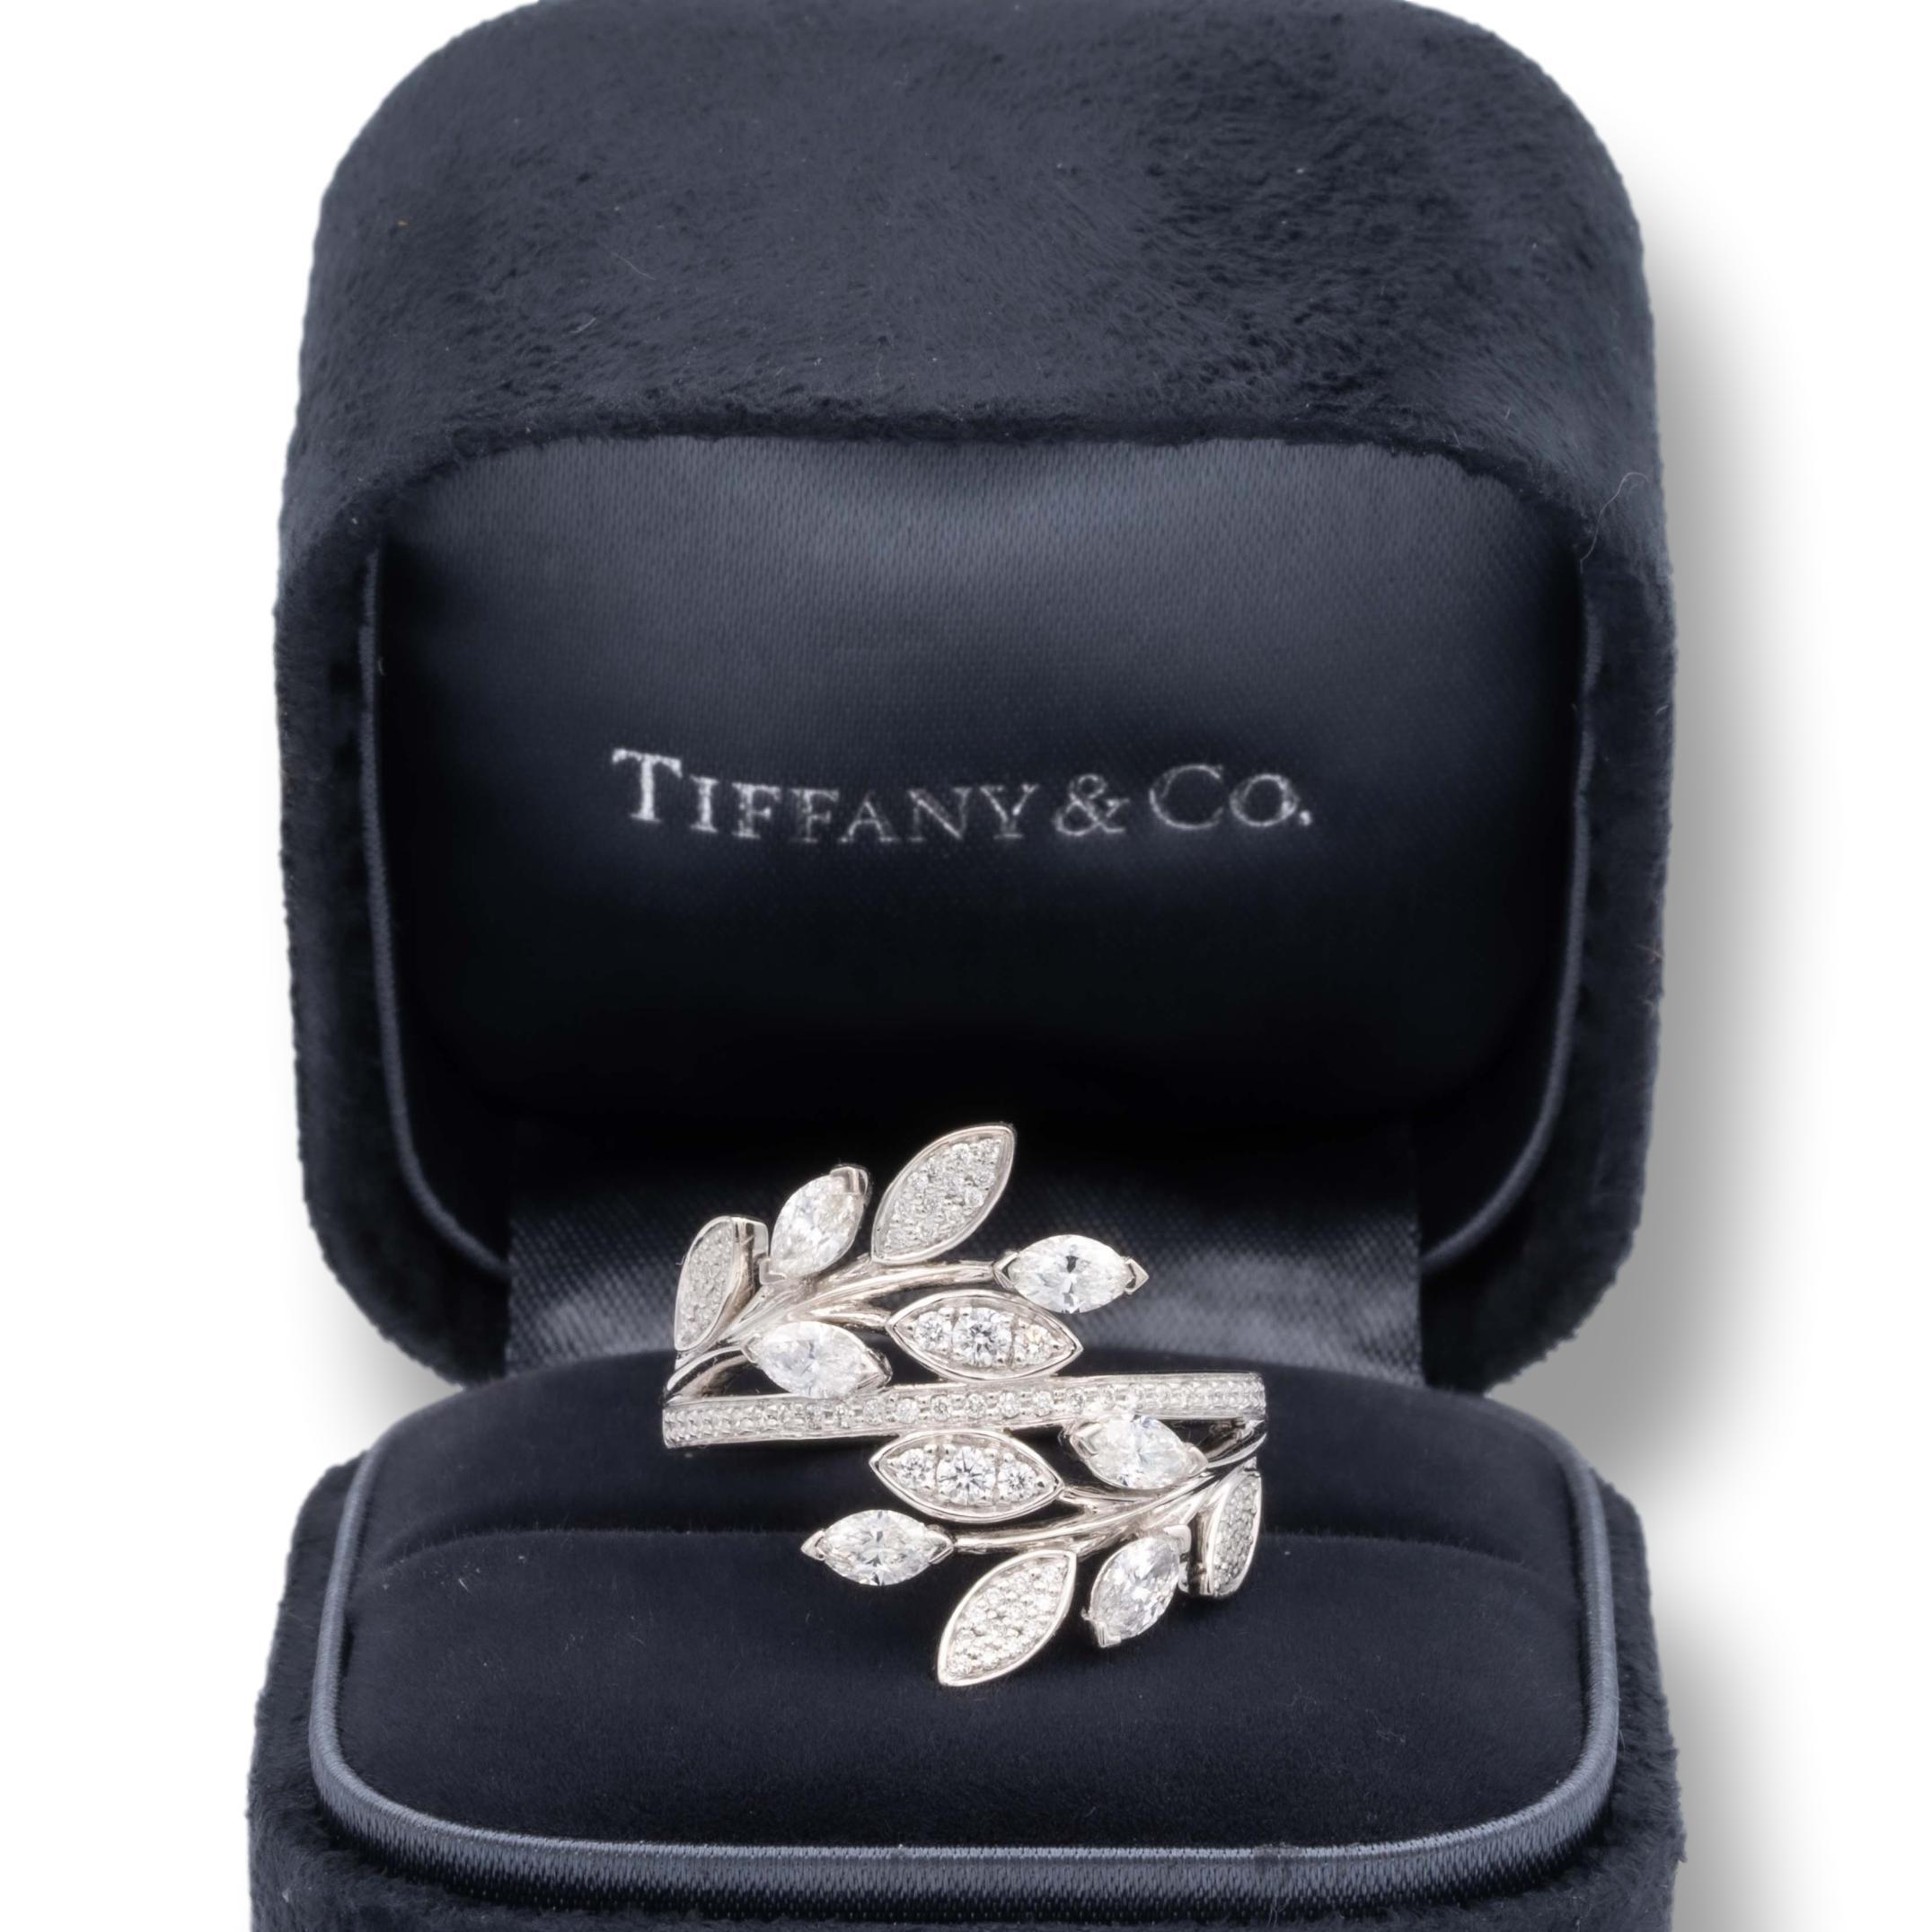 Tiffany & Co. Victoria Bypass ring finely crafted in platinum with 82 bead set round brilliant cut diamonds and 6 marquise shaped diamonds weighing 1.19 carats total weight. F-G Color, VVS- Vs clarity

Stamp: © Tiffany & Co. Pt950
Size: 7 - Can be